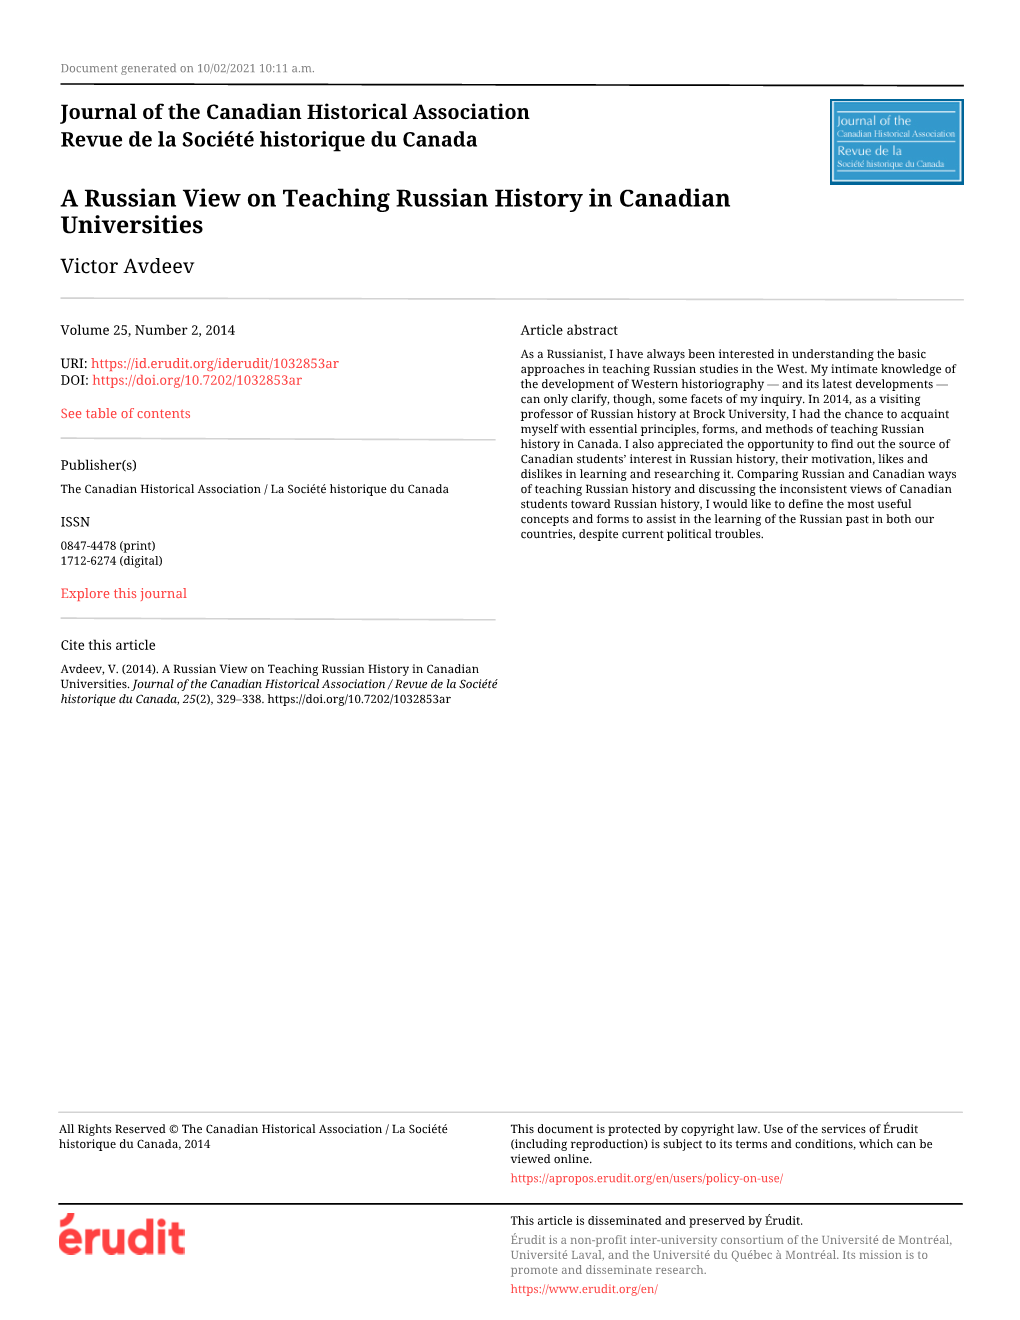 A Russian View on Teaching Russian History in Canadian Universities Victor Avdeev